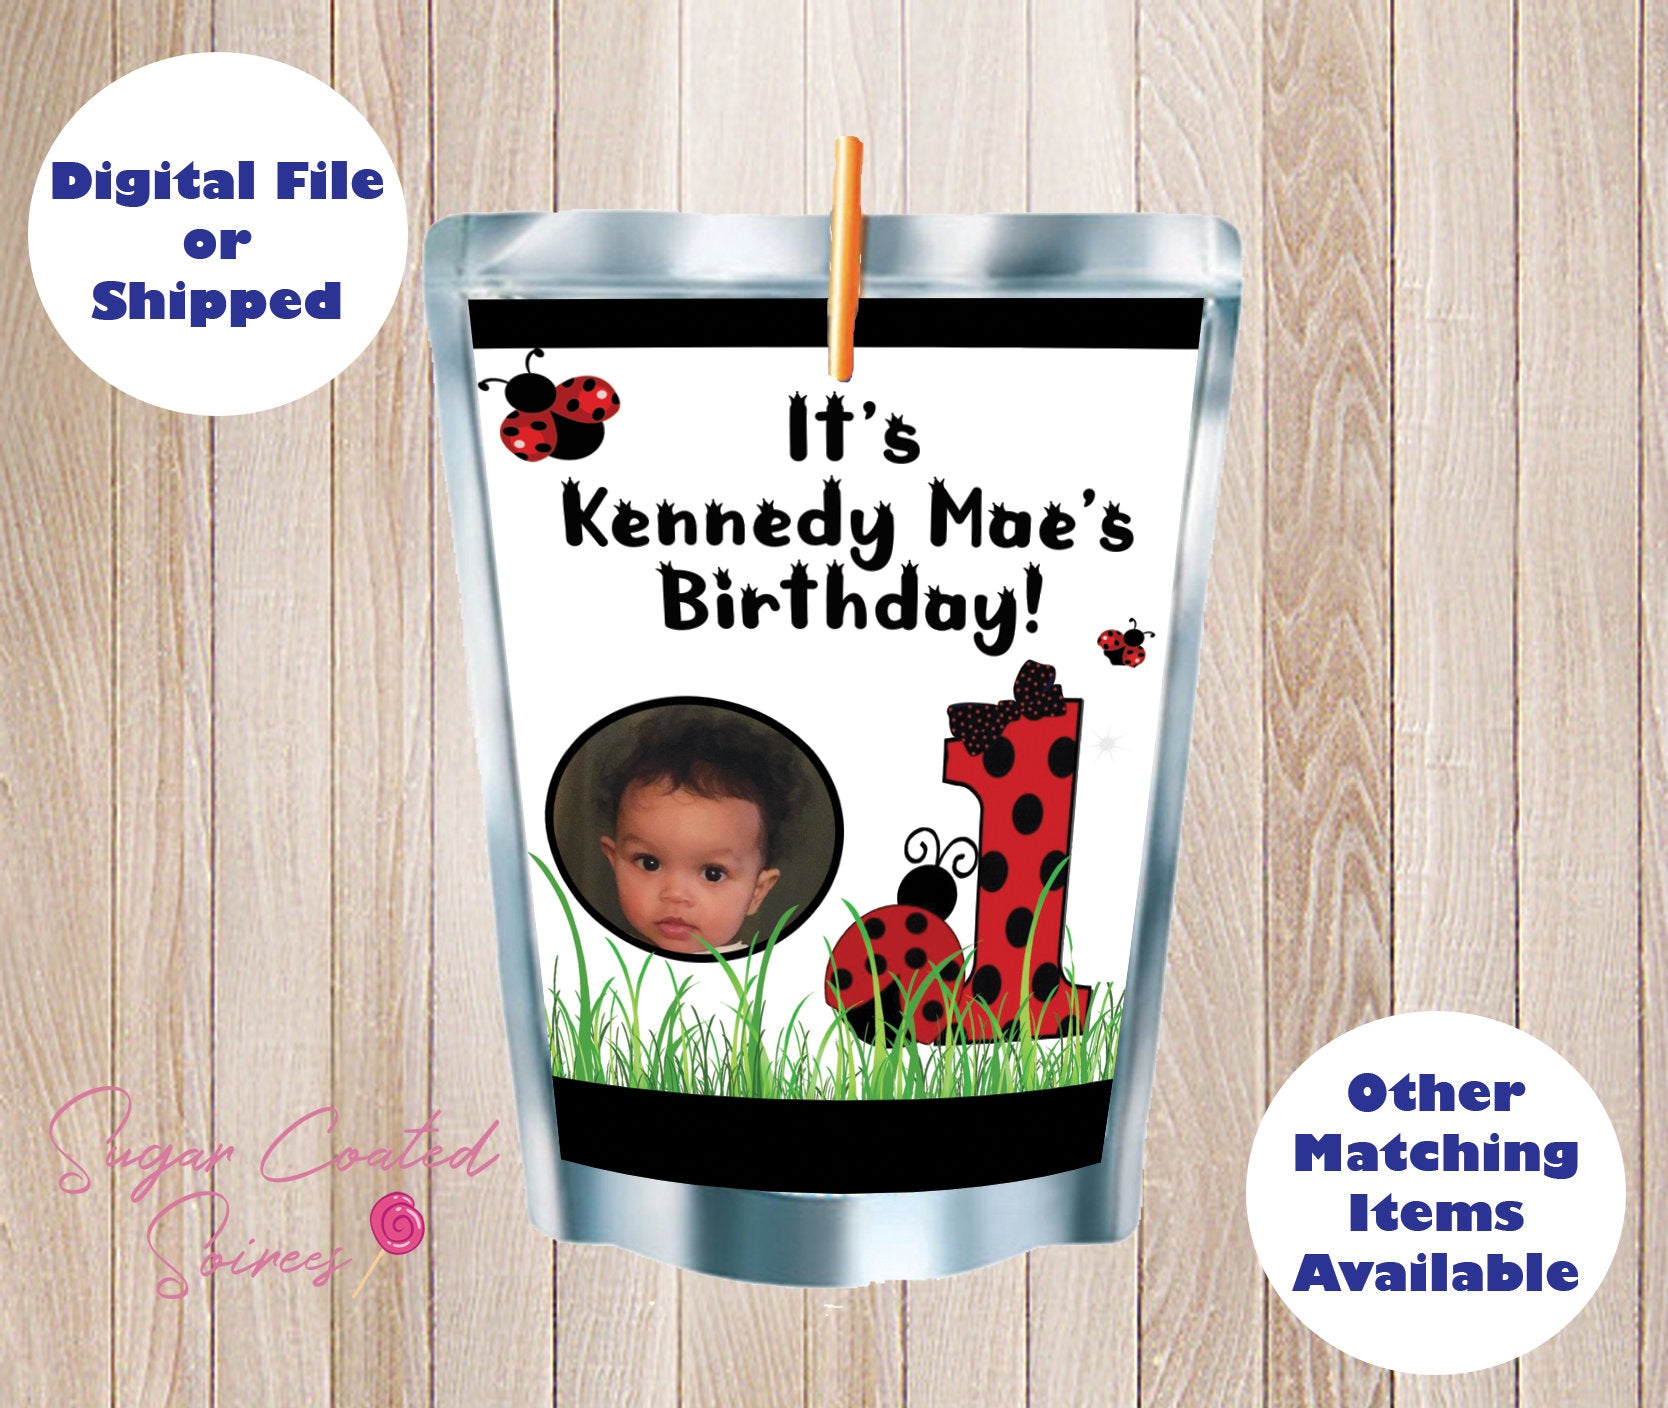 SHIPPED PRINTED Lady Bug First 1st Birthday Spring Garden Personalized Capri Sun Juice Label, Birthday Party, Party Favor, DIYst